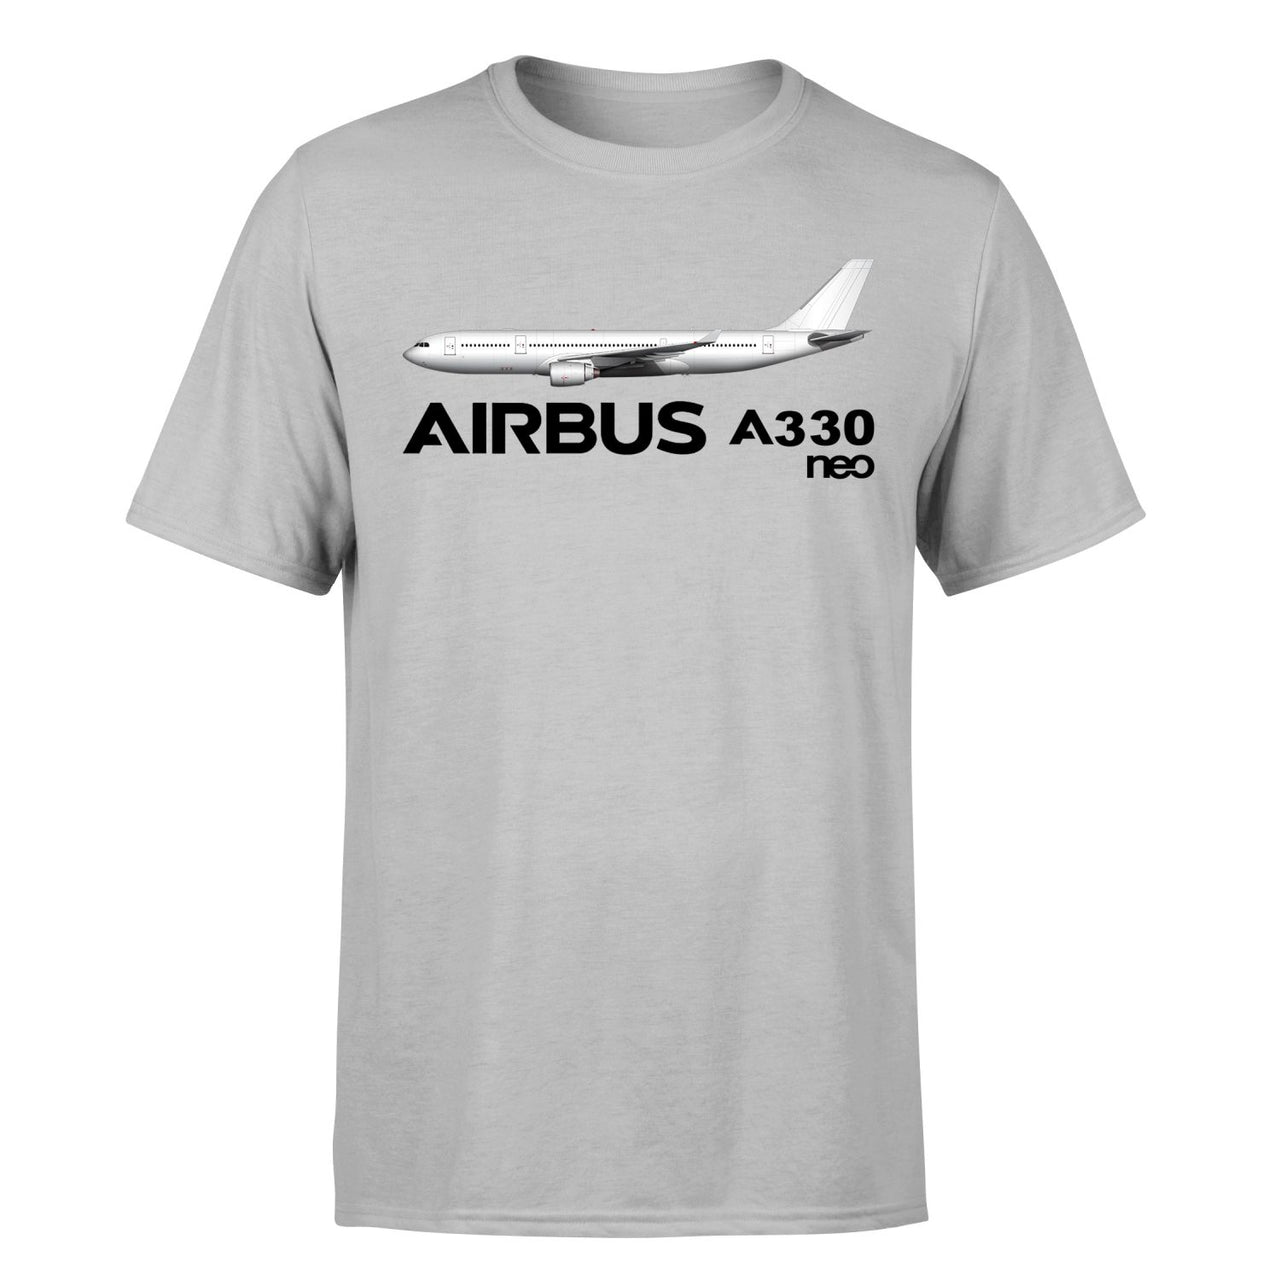 The Airbus A330neo Designed T-Shirts